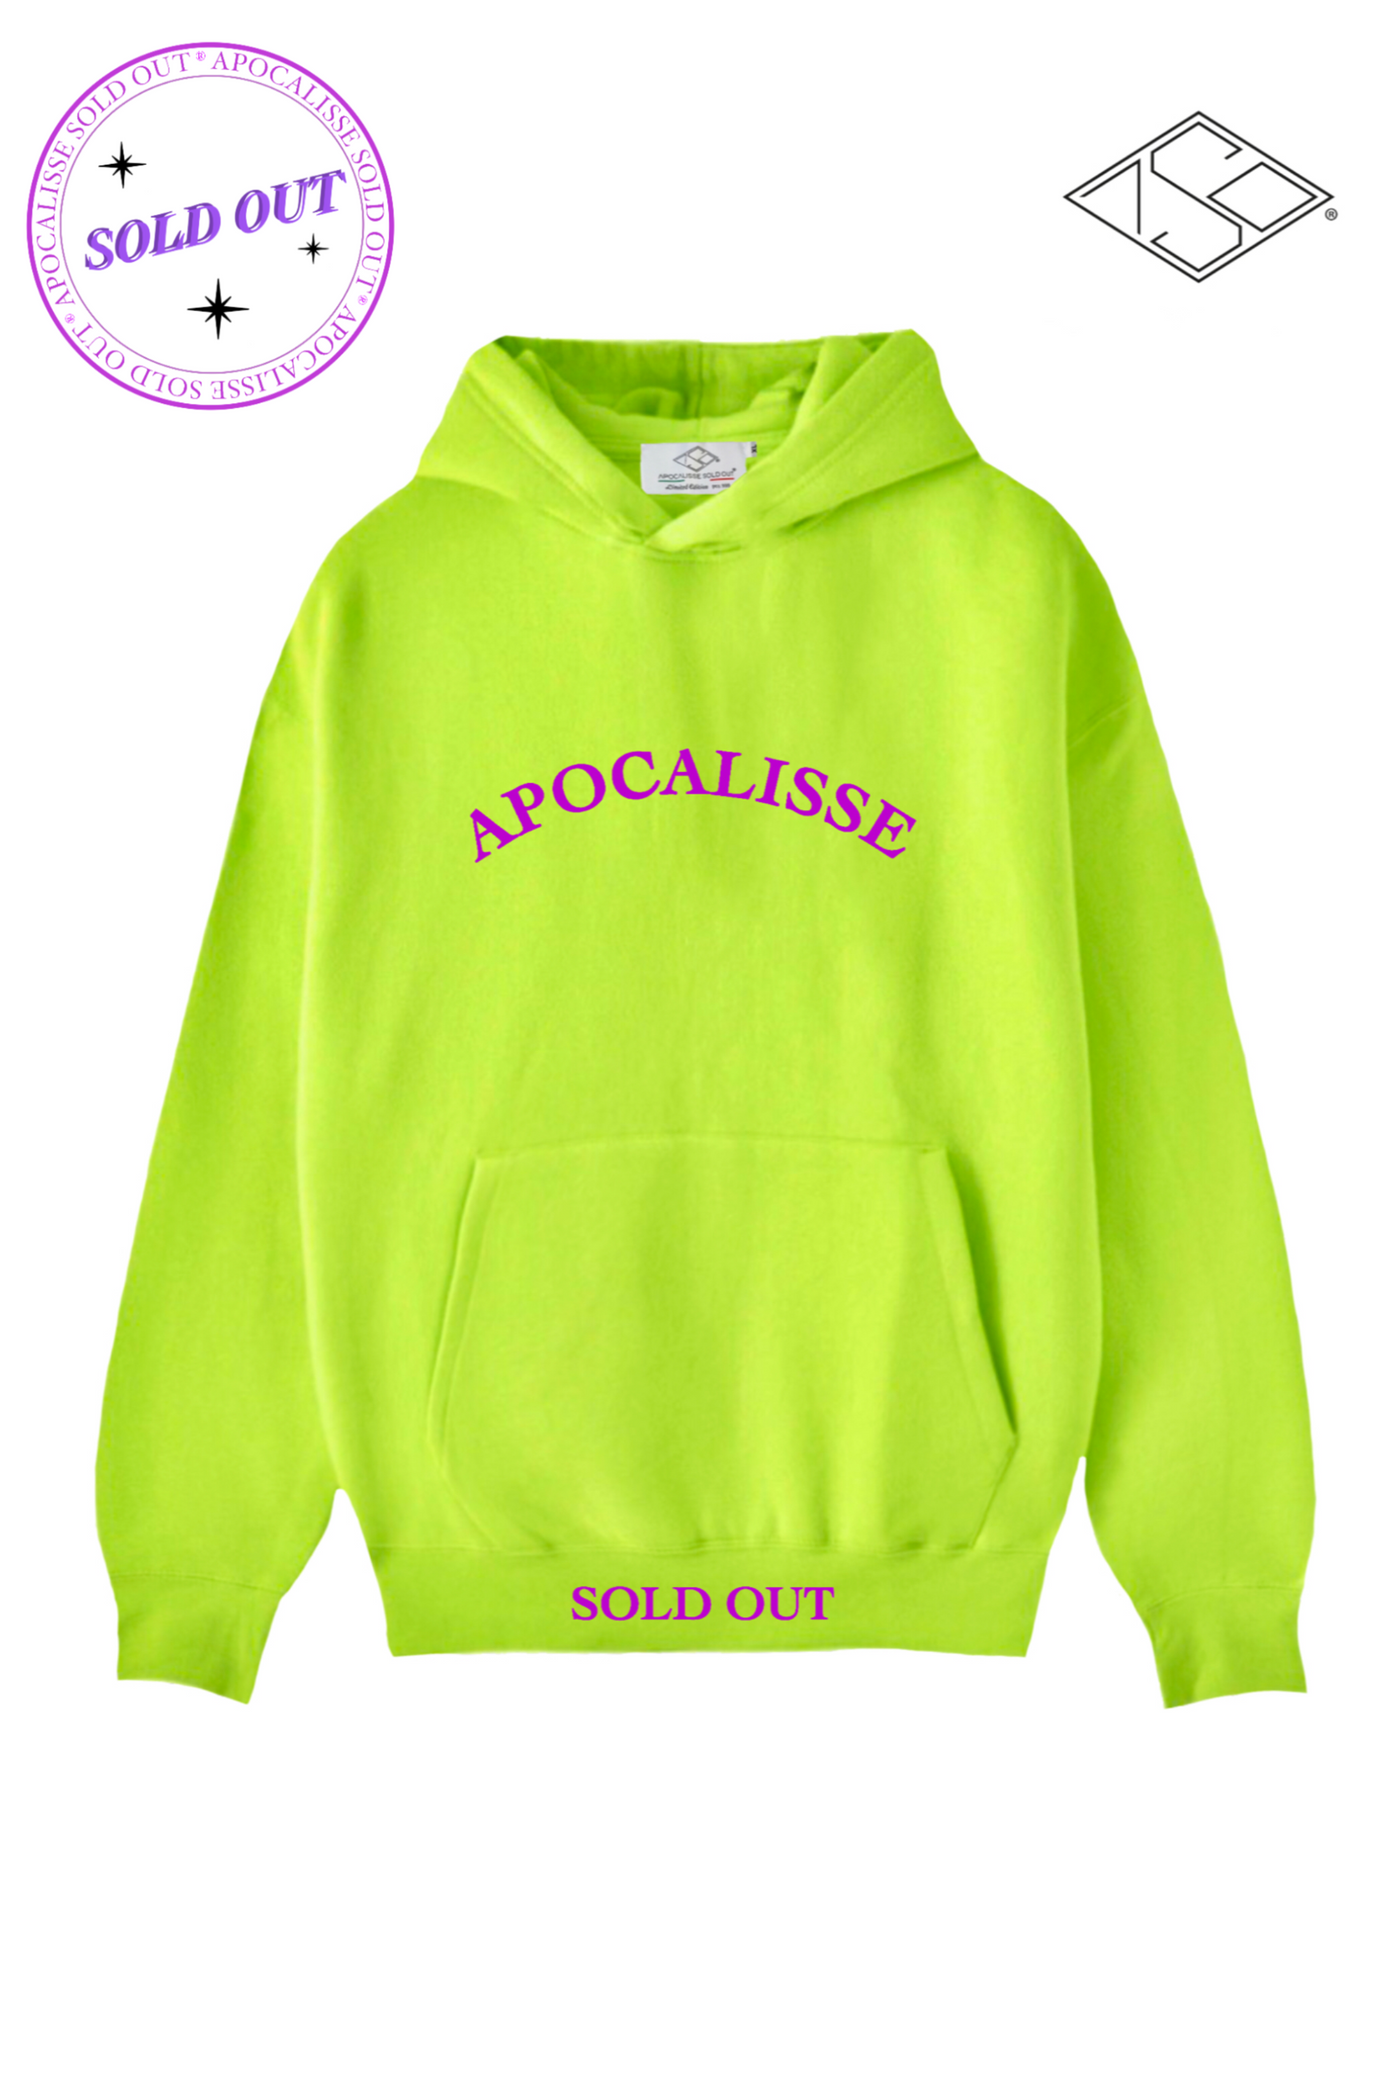 Apocalisse Lime